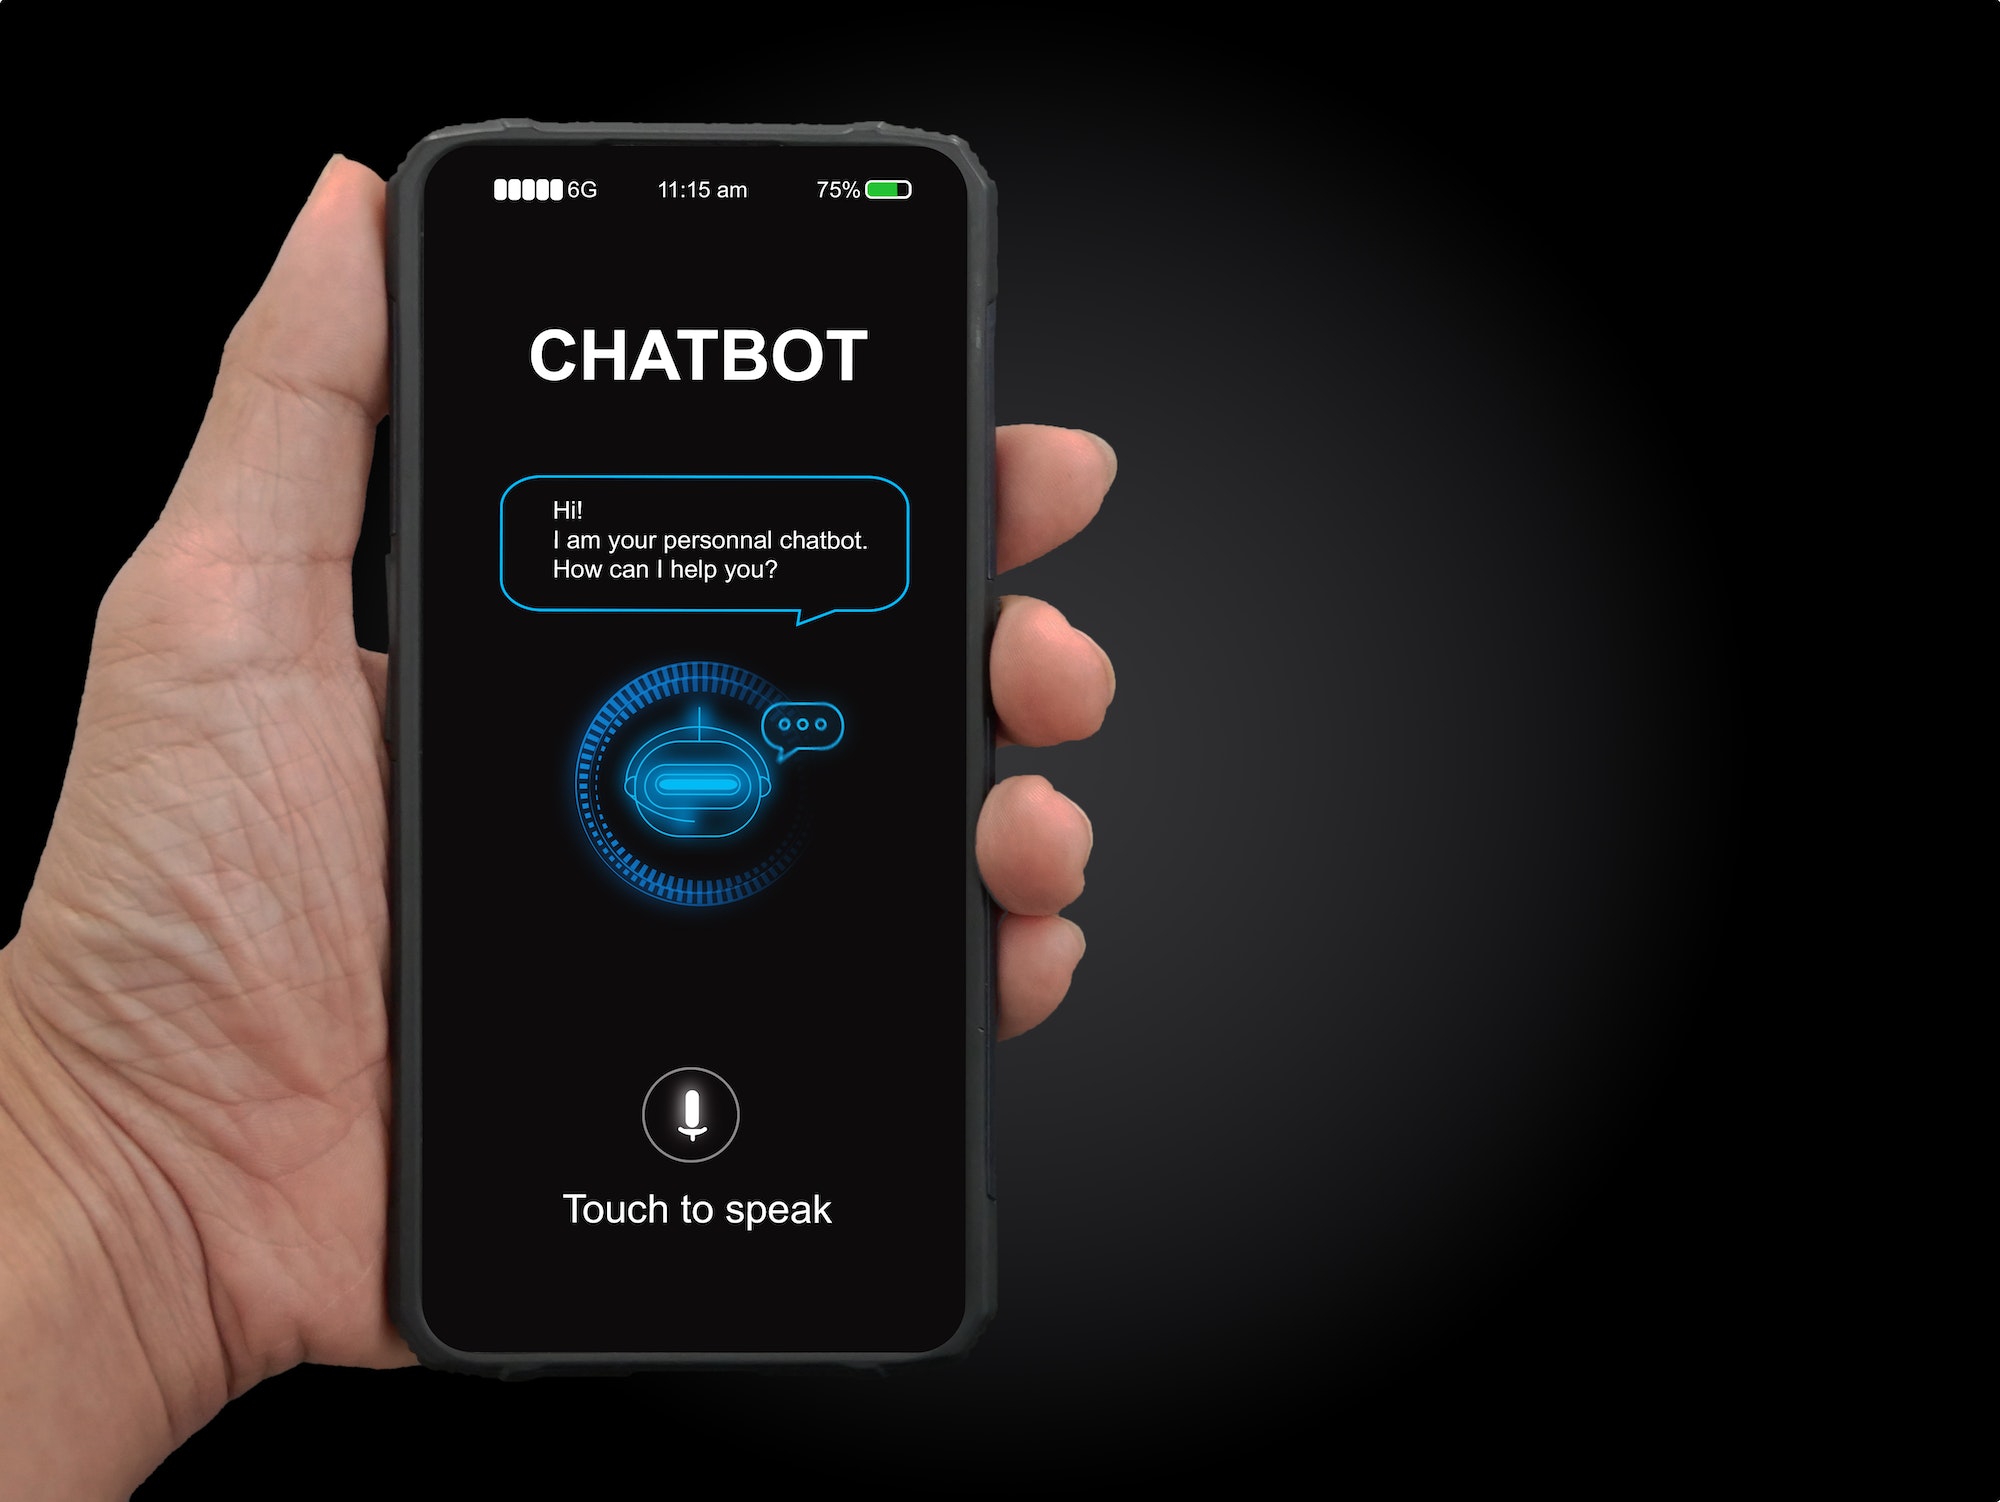 A man's hand holding mobile smartphone with chatterbot application